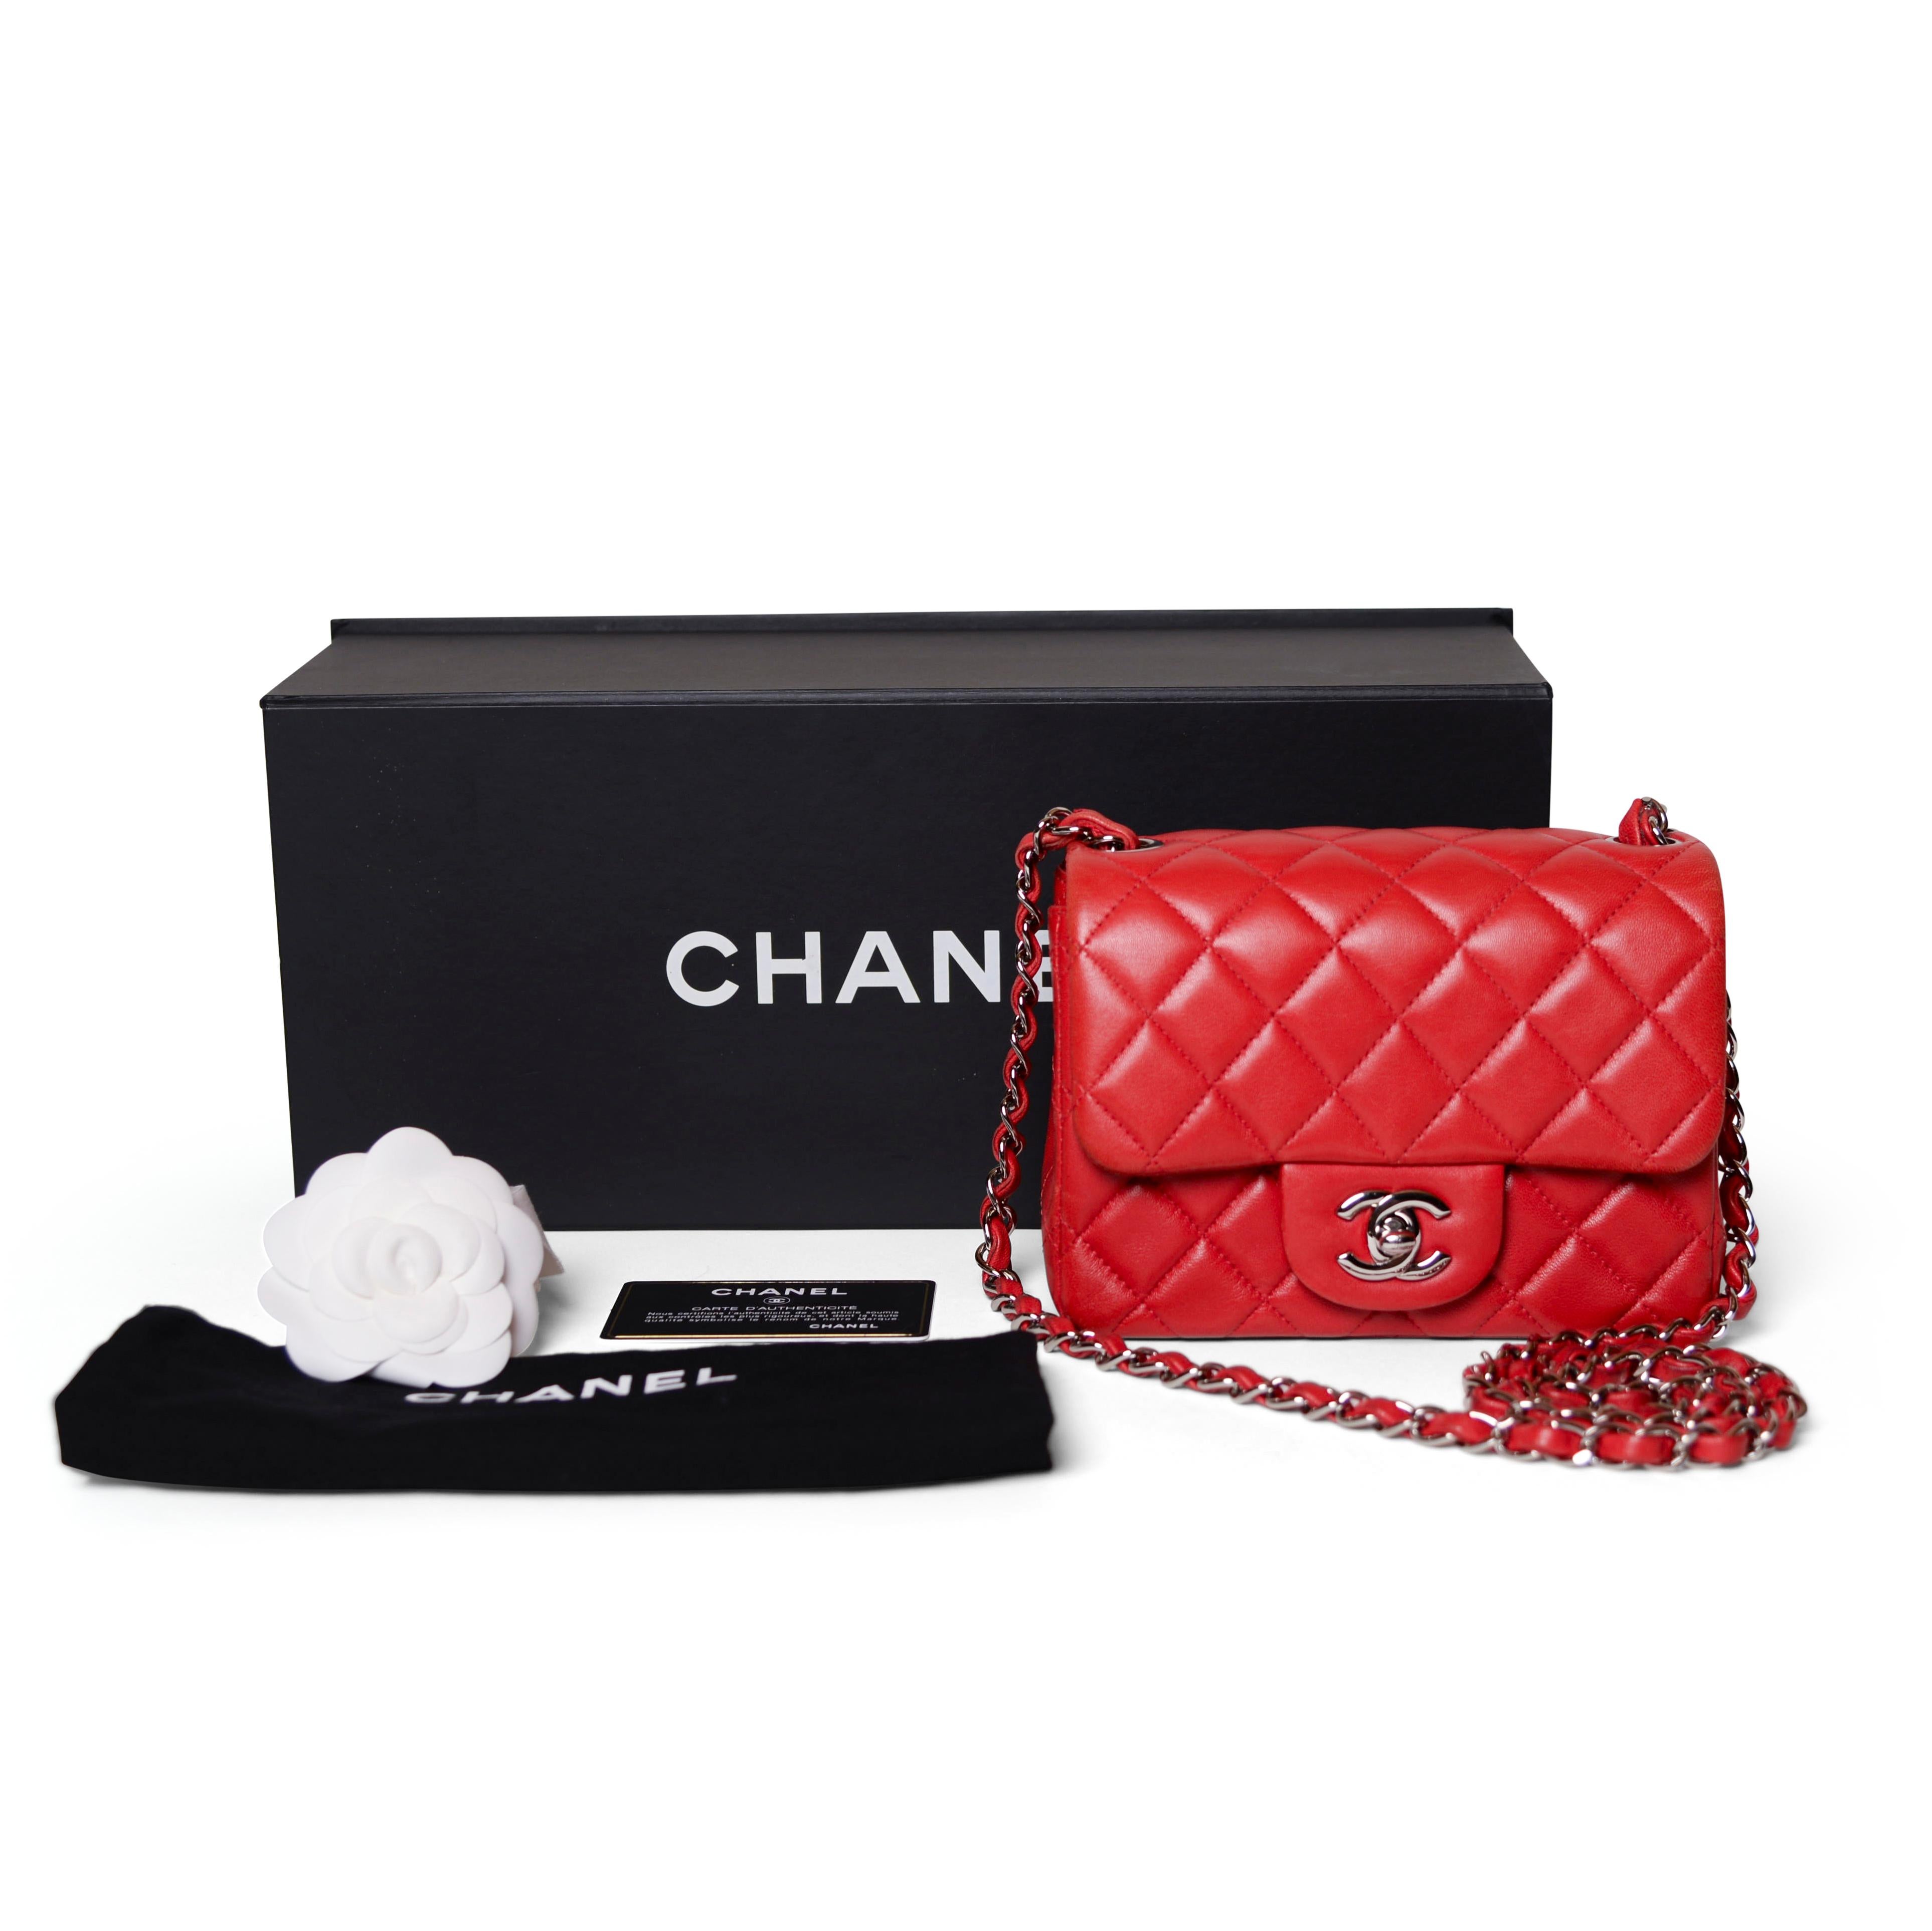 From the collection of SAVINETI we offer this Chanel Red Mini Flap Bag:
-	Brand: Chanel
-	Model: Mini Flap Bag
-	Year: 2013-2014
-	Code: 18810962
-	Condition: Good
-	Materials: Lambskin Leather
-	Extras: Full-Set including Chanel Box, Dustbag and